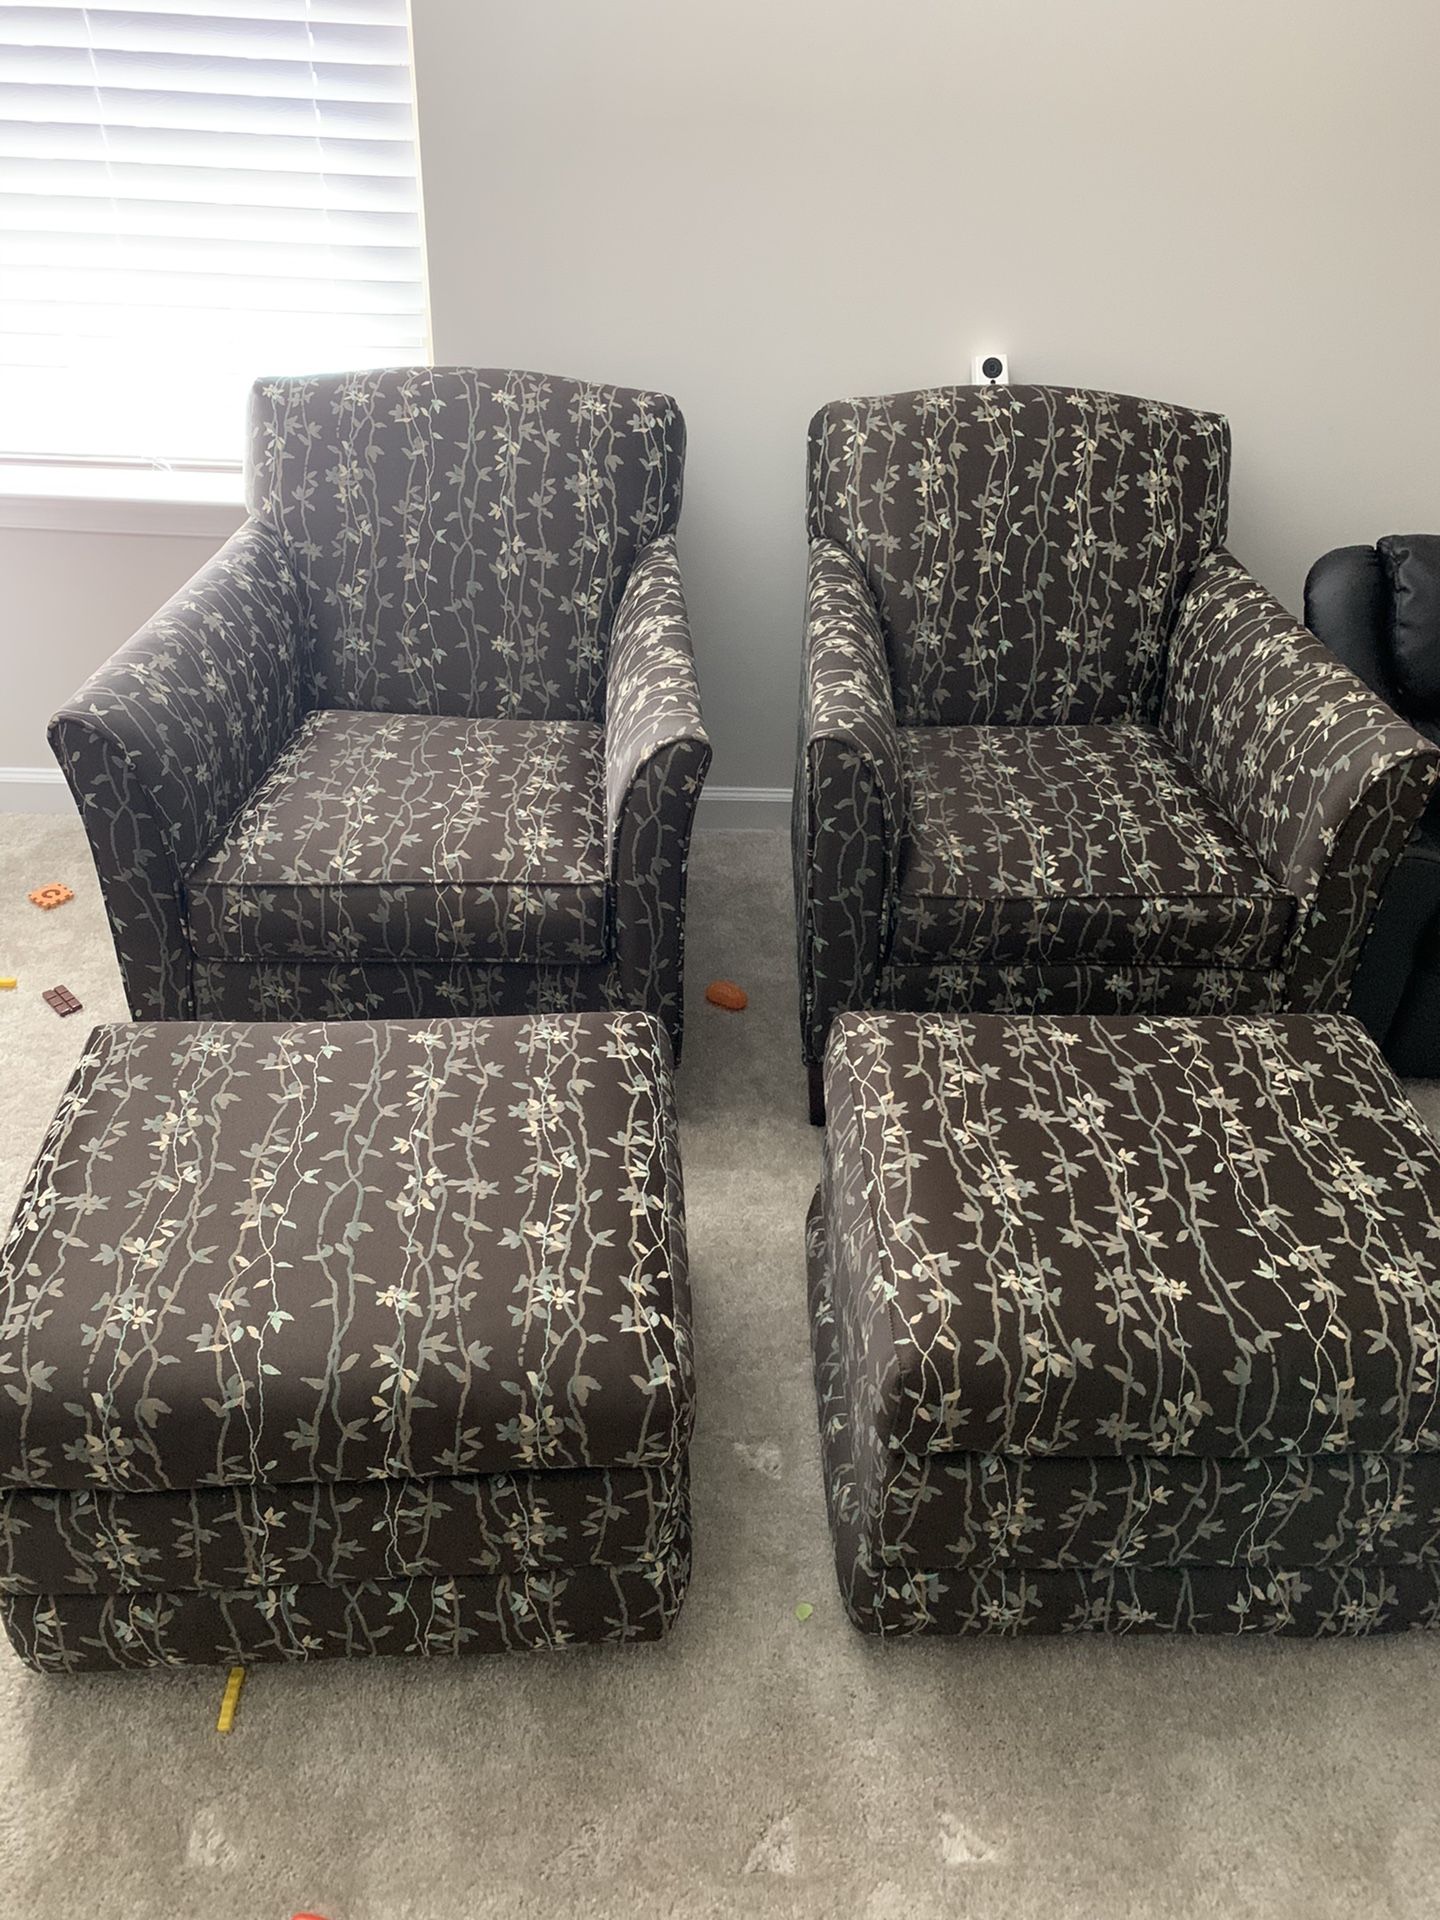 2 Arm chairs with 2 ottoman